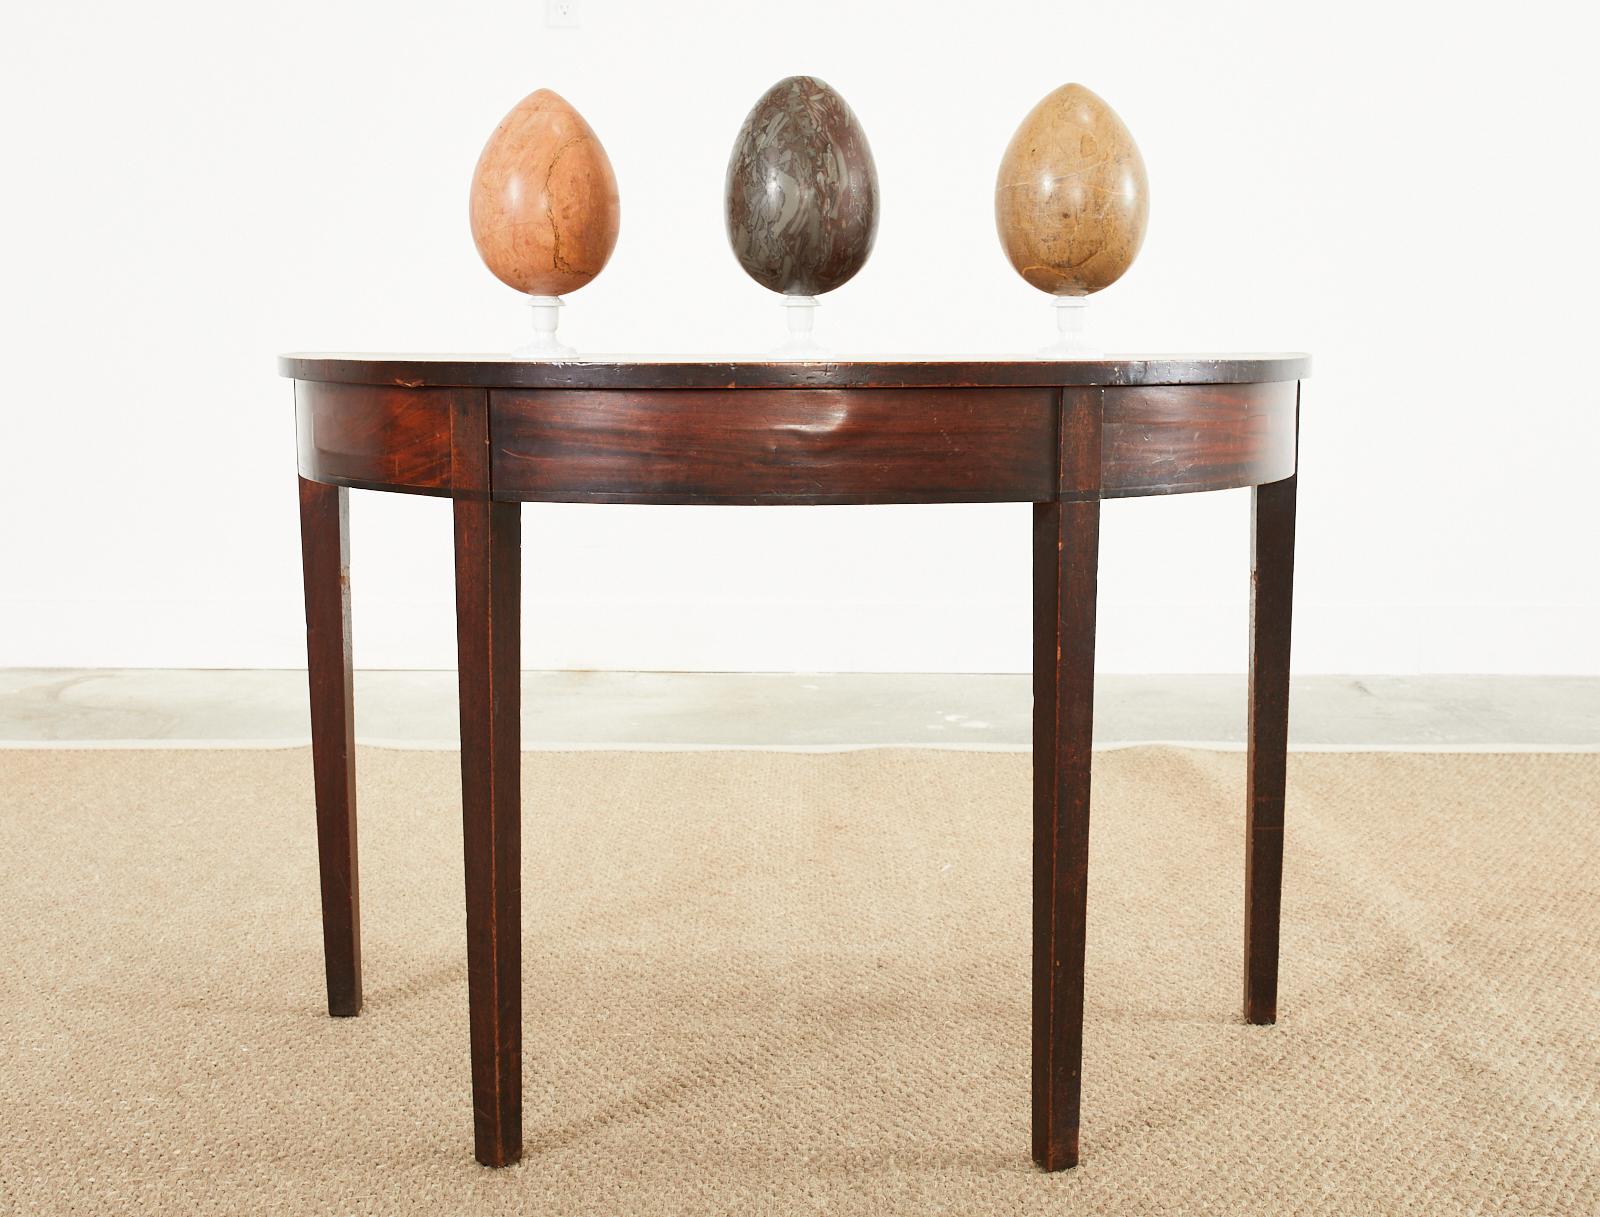 Handsome pair of 19th century Georgian demi-lune console tables crafted from mahogany. Prior ends of a large Georgian banquet table that fit together to form a 42 inch round circle. The tables feature radiant mahogany veneered friezes supported by